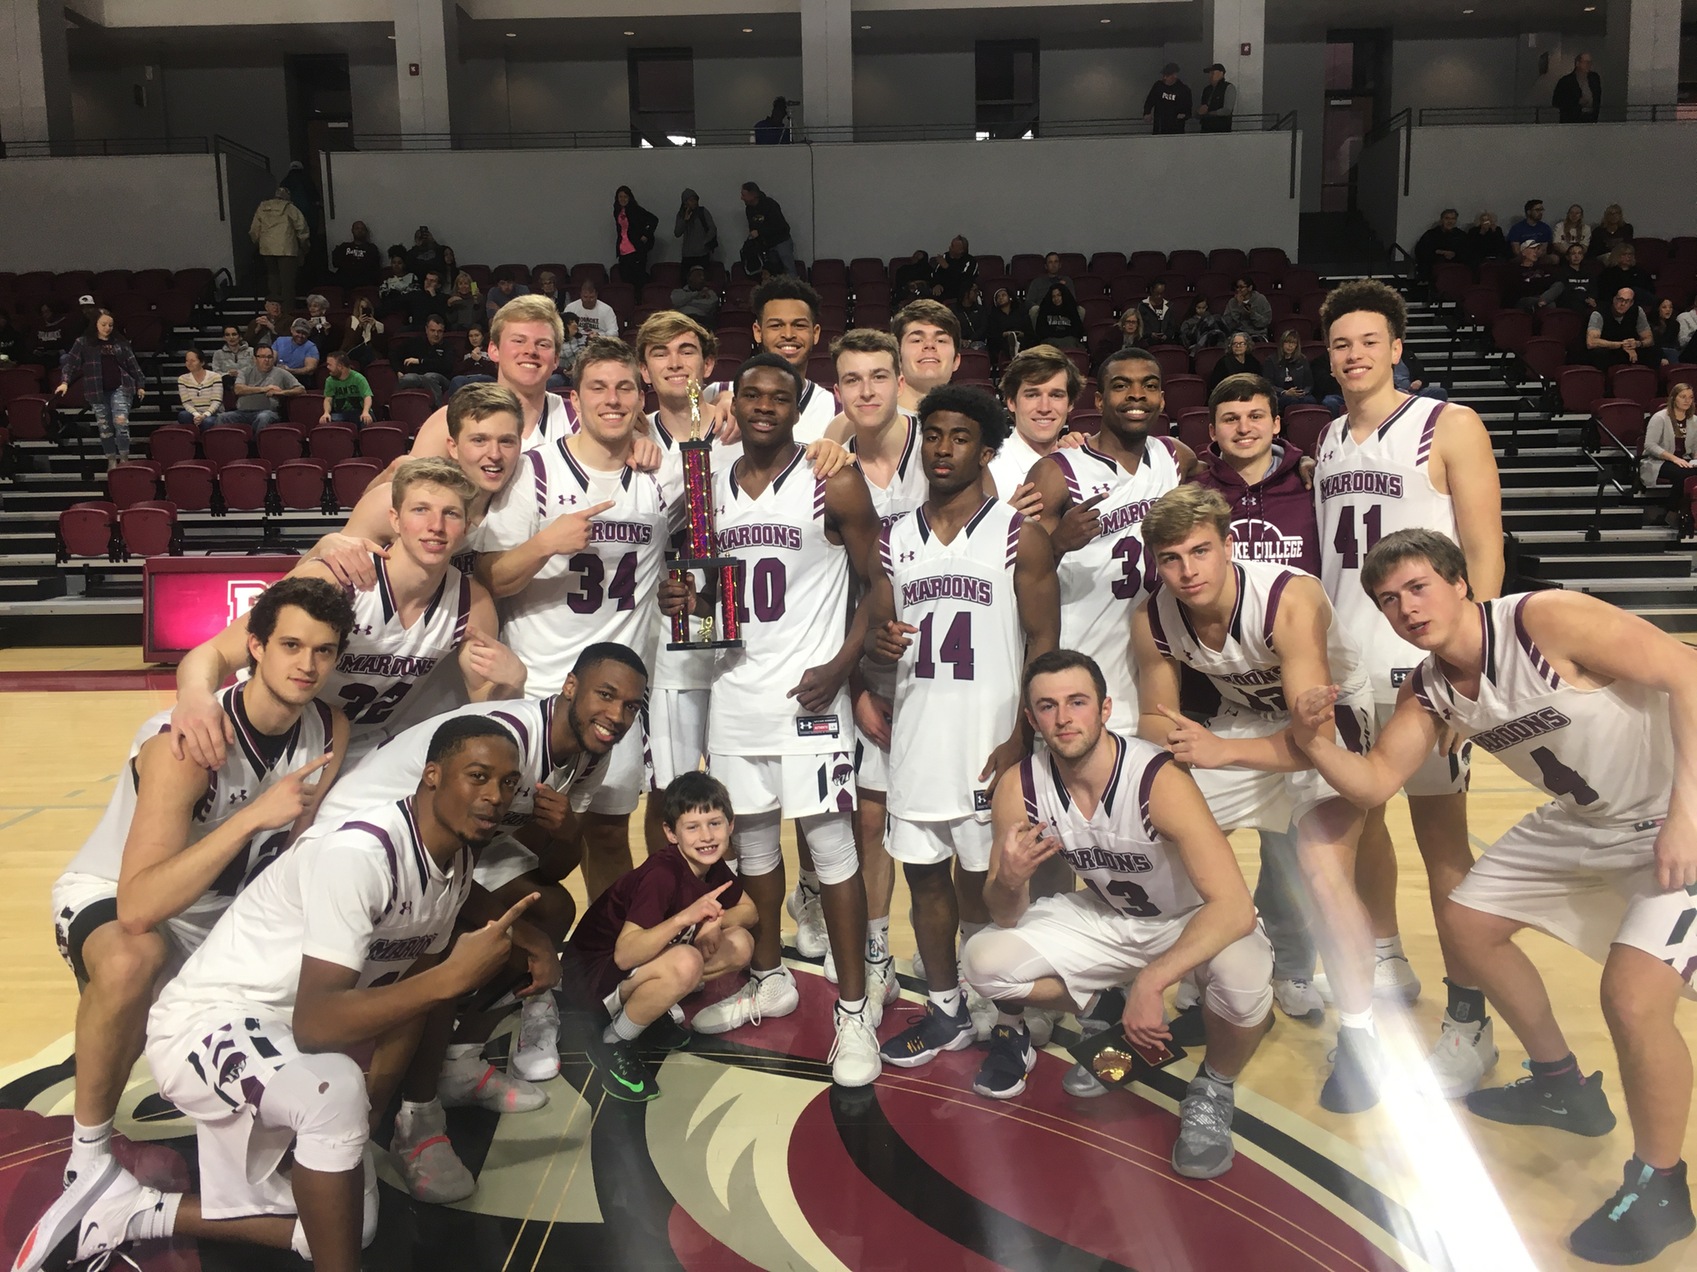 Roanoke captured the 2019 Cregger Invitational with an 86-54 victory over Stockton on Monday afternoon in Salem.